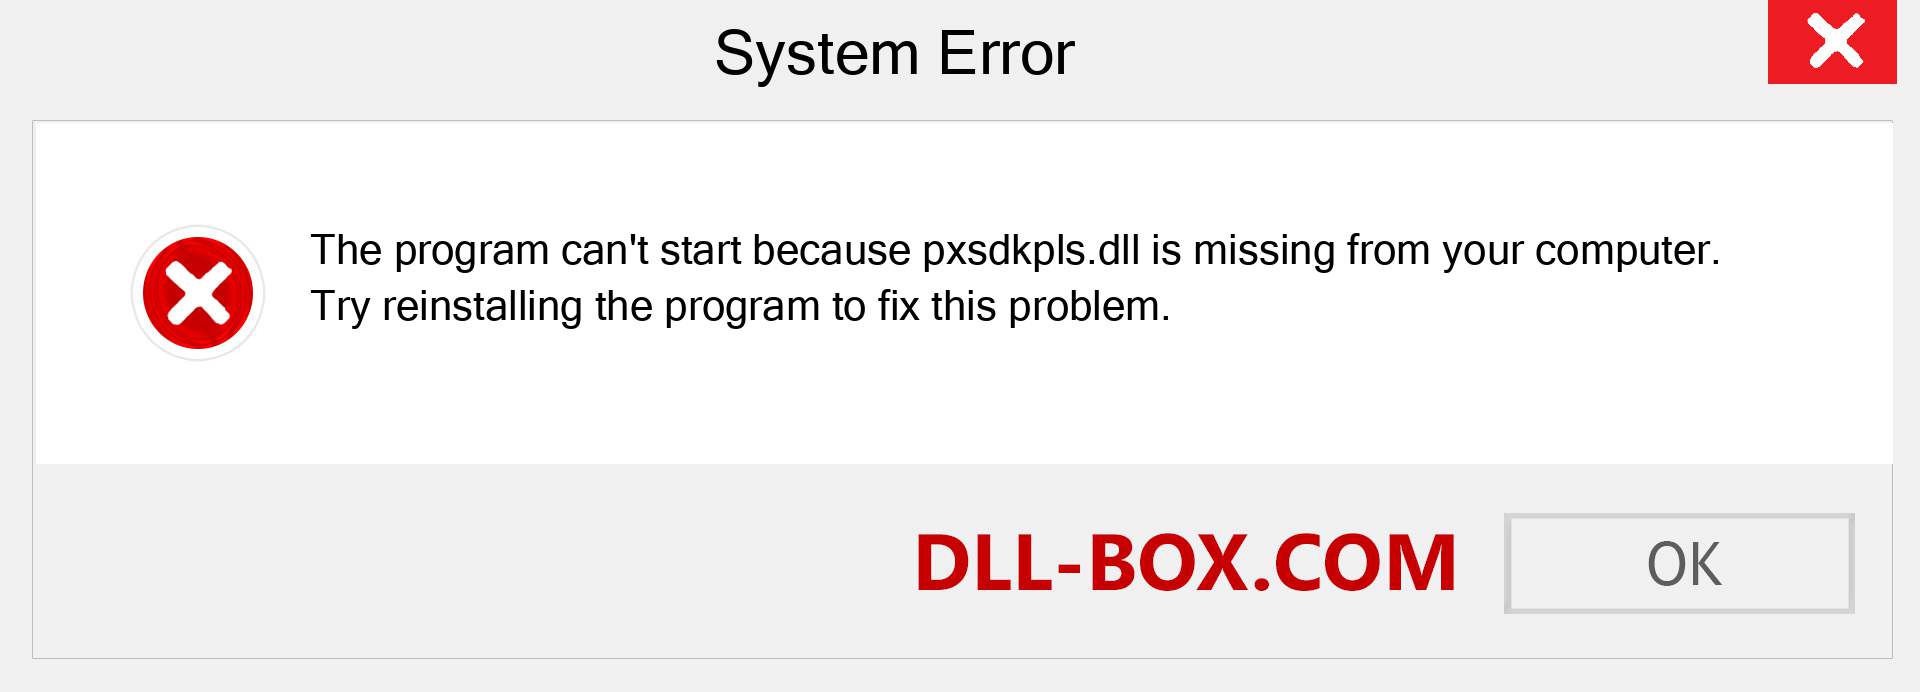  pxsdkpls.dll file is missing?. Download for Windows 7, 8, 10 - Fix  pxsdkpls dll Missing Error on Windows, photos, images